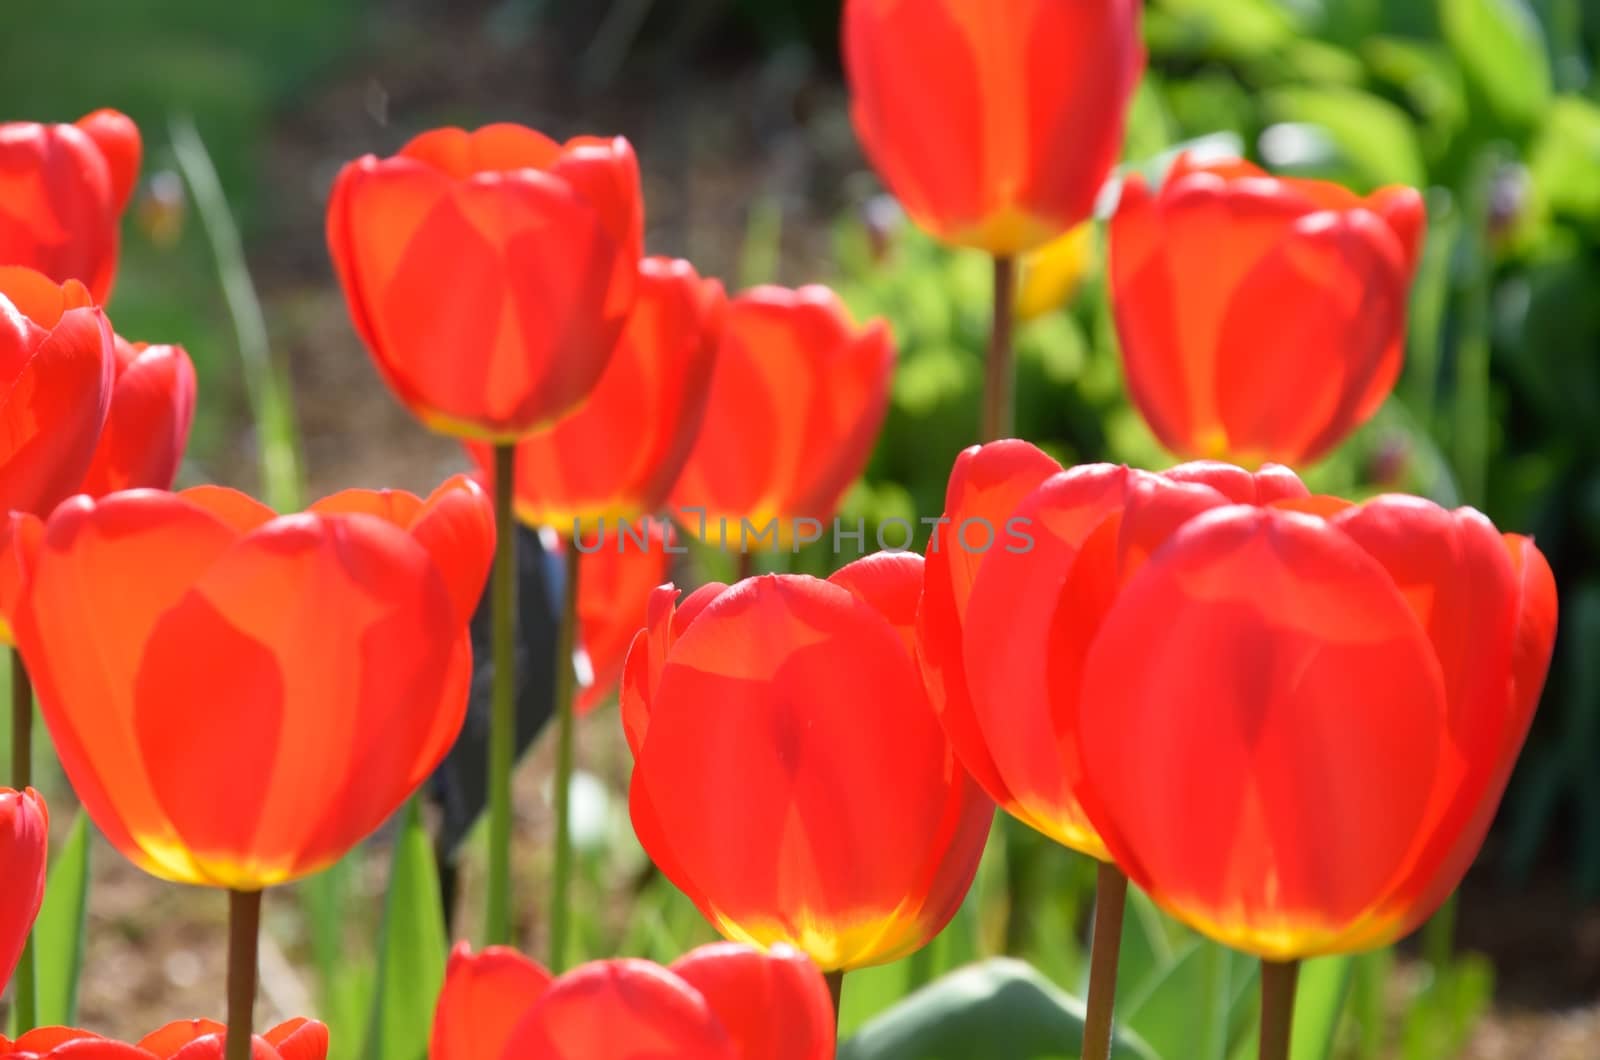 Bright red tulips in spring by pauws99